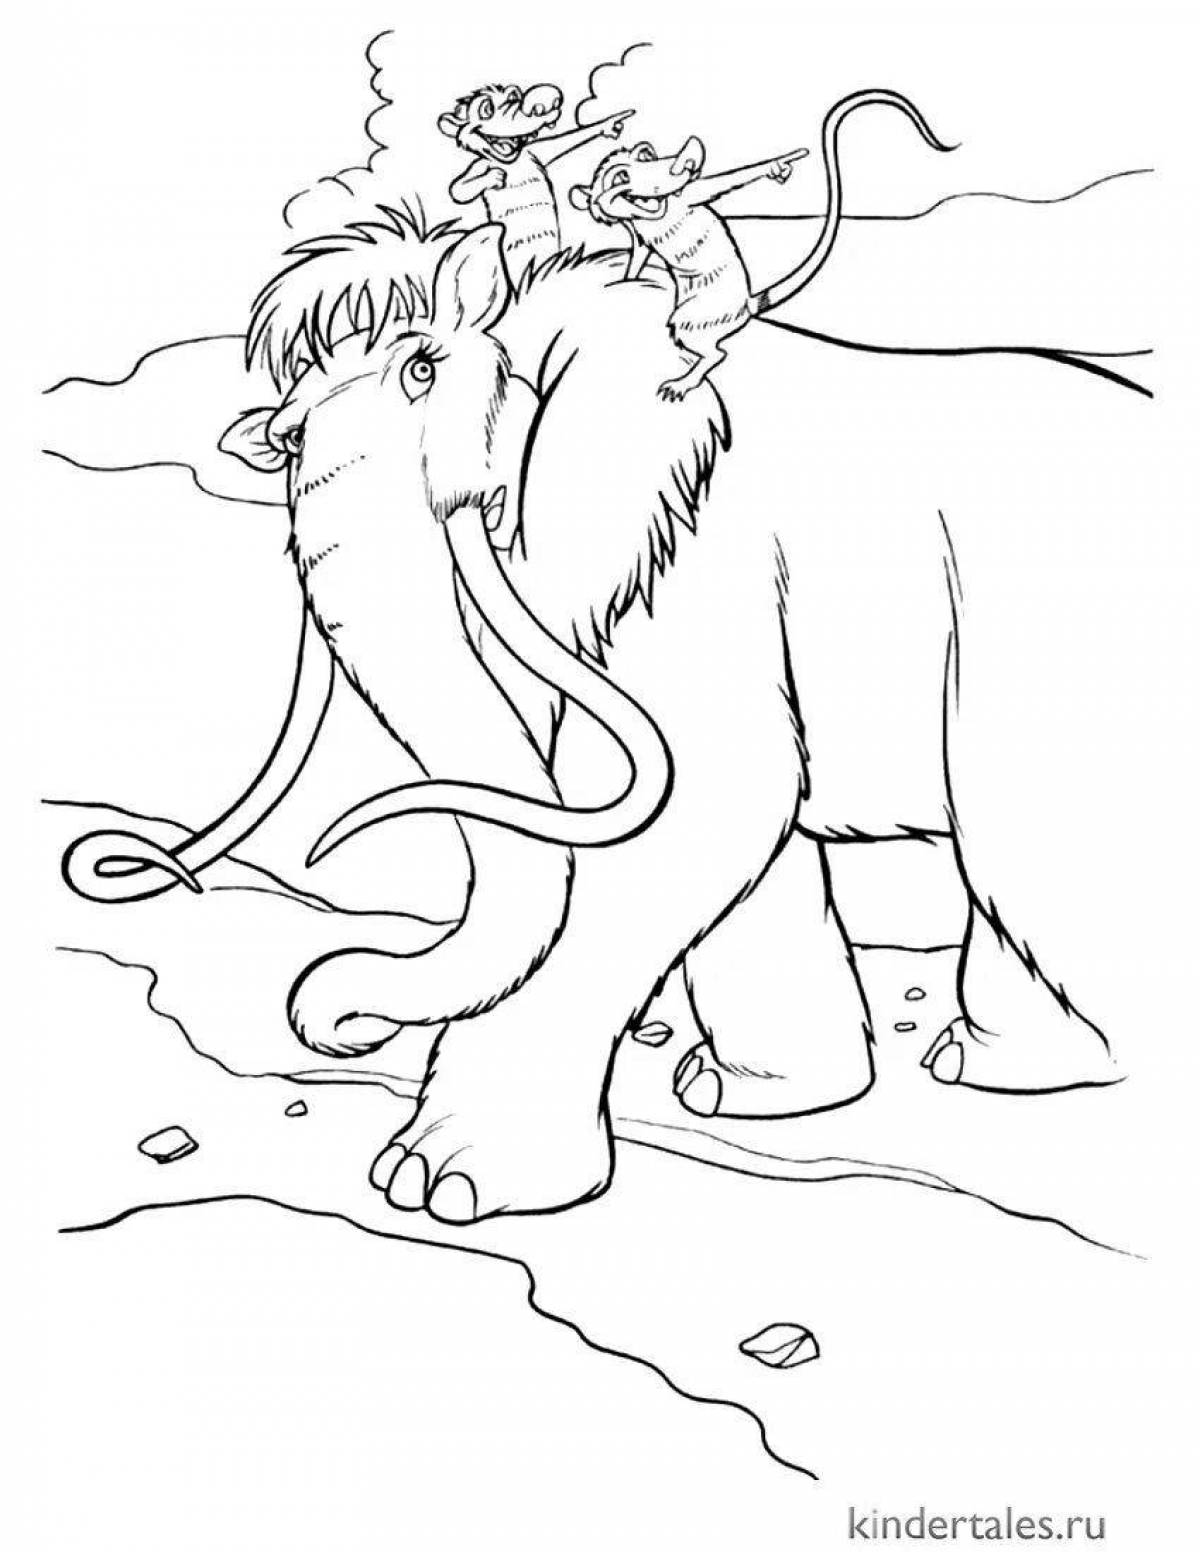 Color-fiesta mammoth coloring page for kids